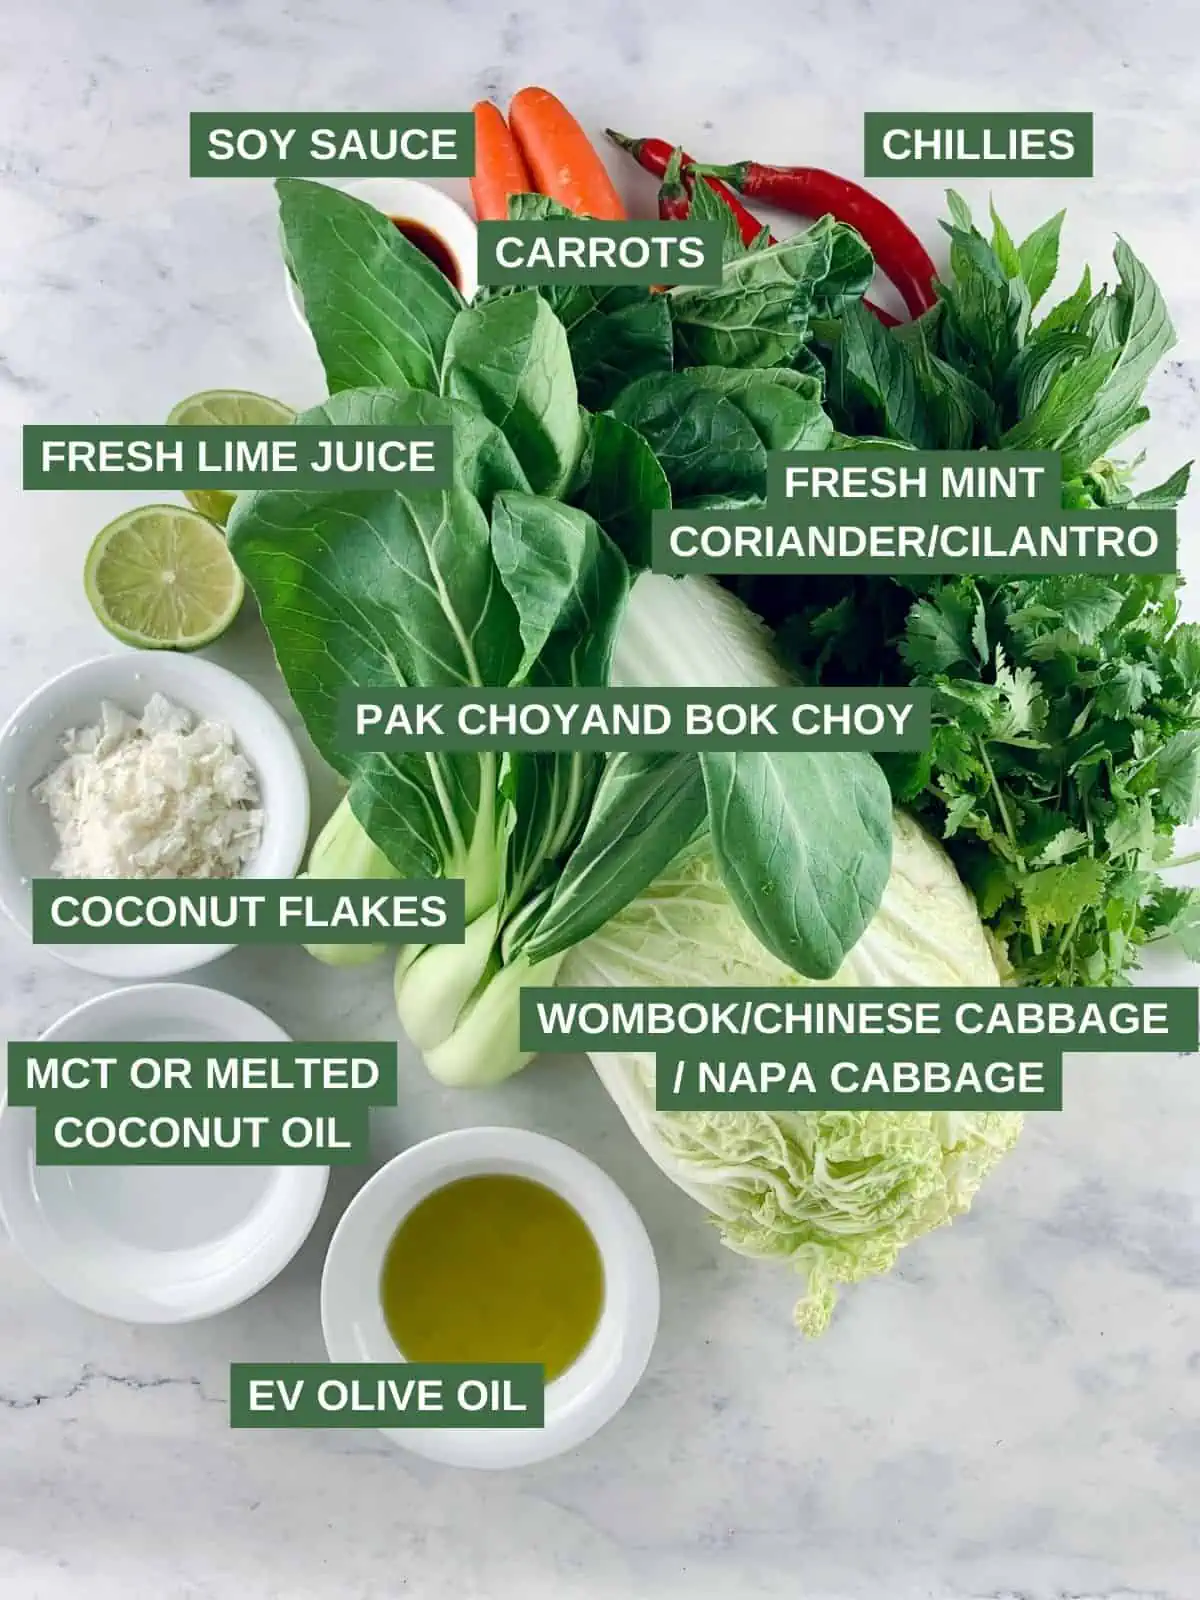 Labelled ingredients needed to make an Asian Wombok salad.